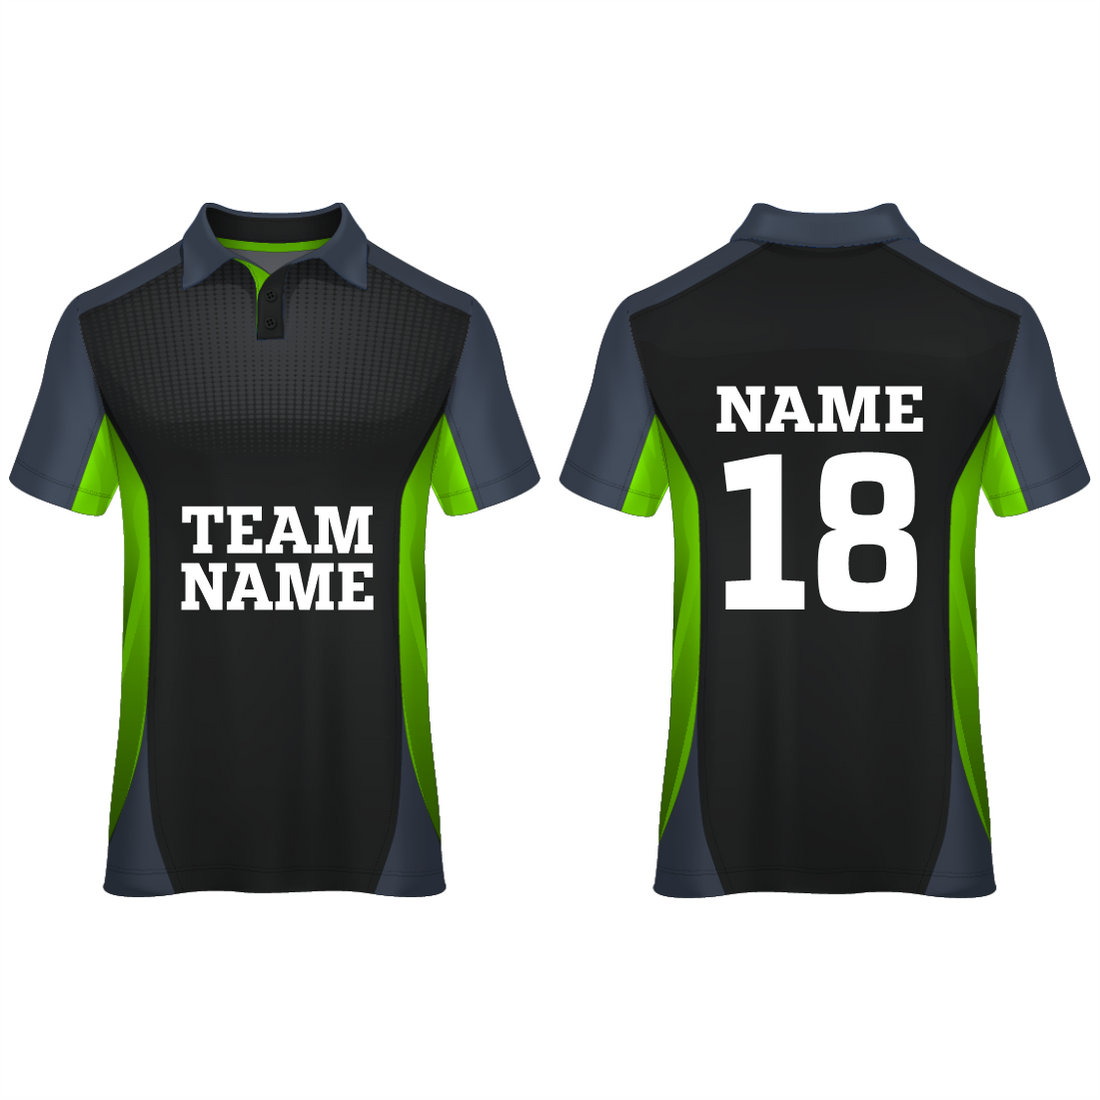 NEXT PRINT All Over Printed Customized Sublimation T-Shirt Unisex Sports Jersey Player Name & Number, Team Name.1269807820